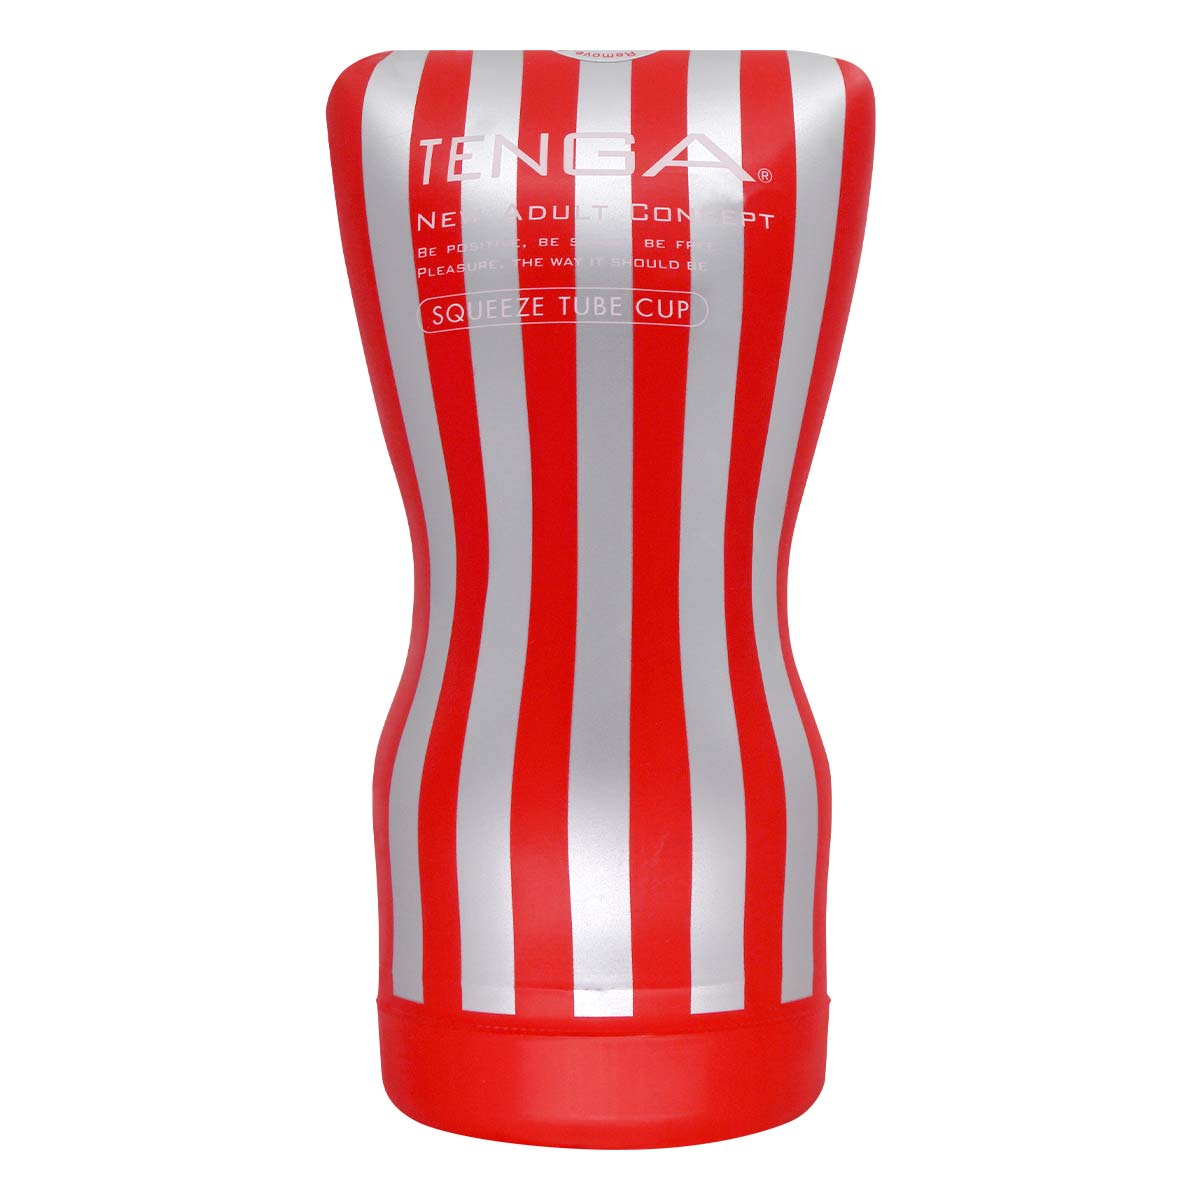 TENGA SQUEEZE TUBE CUP 2nd Generation-p_2